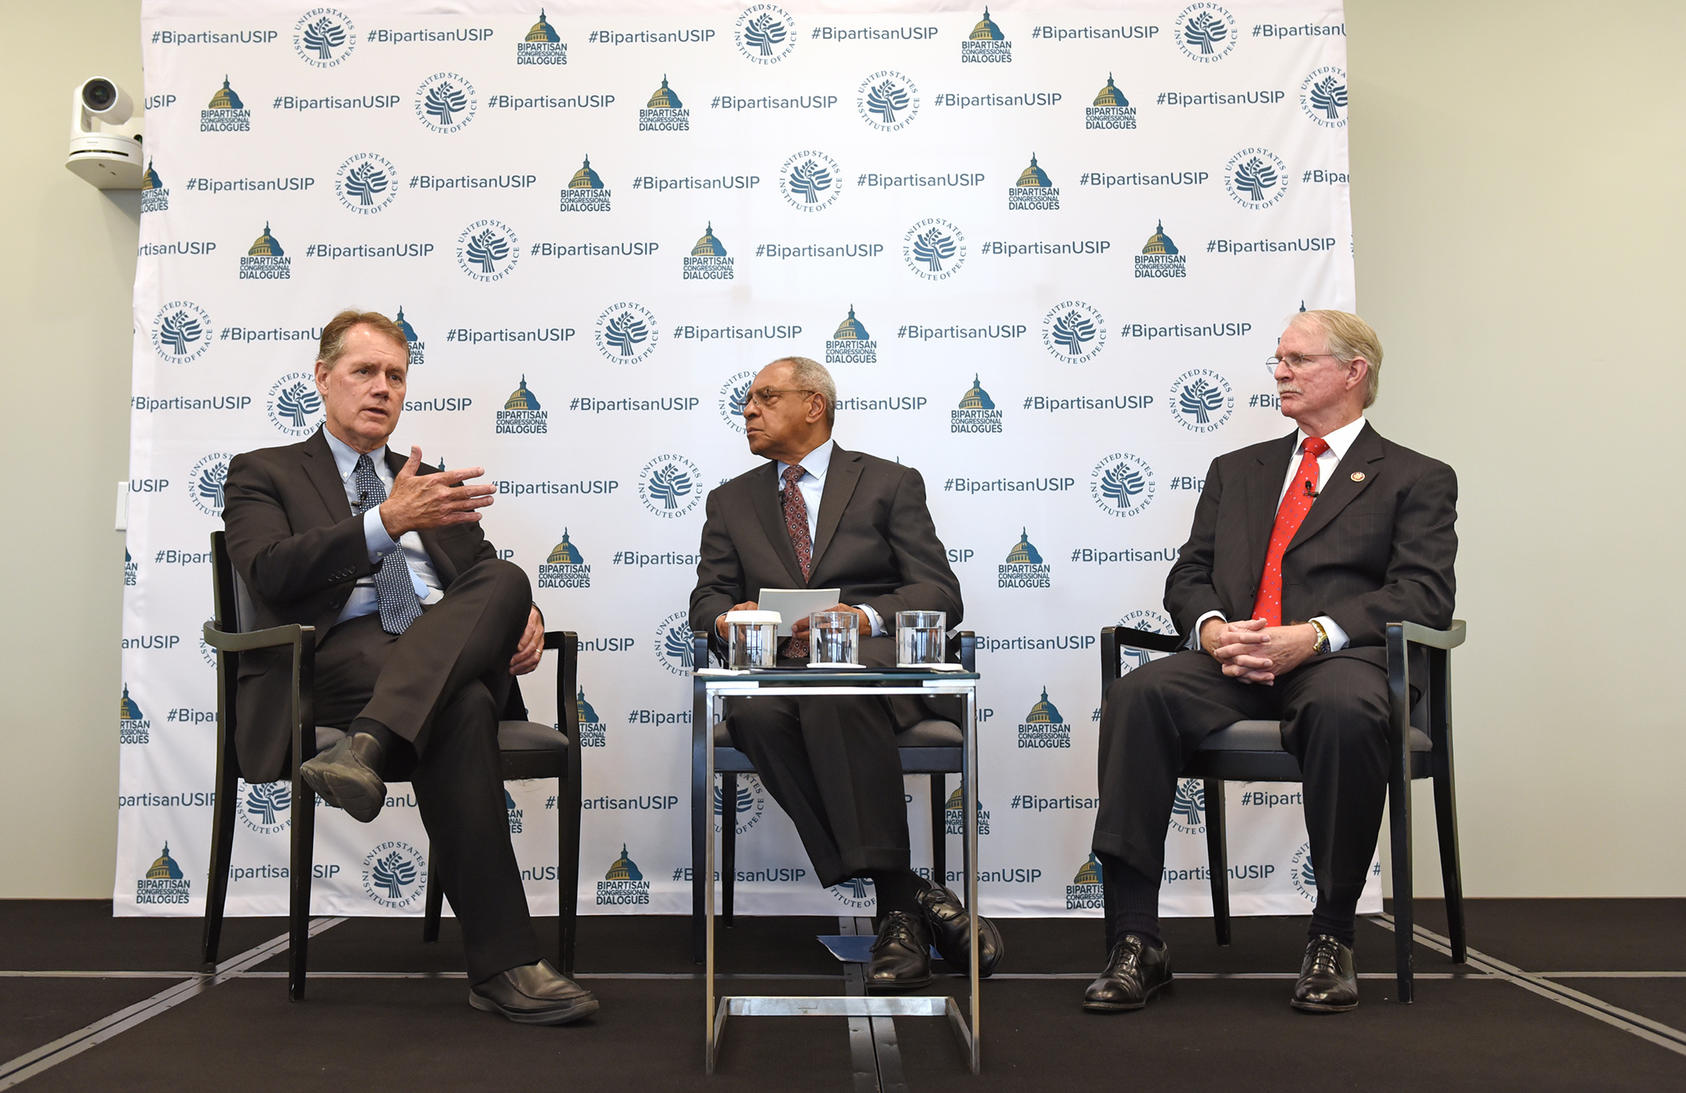 From left to right: Rep. Ed Case (D-HI), USIP’s Amb. George Moose and Rep. John Rutherford (R-FL) at USIP.